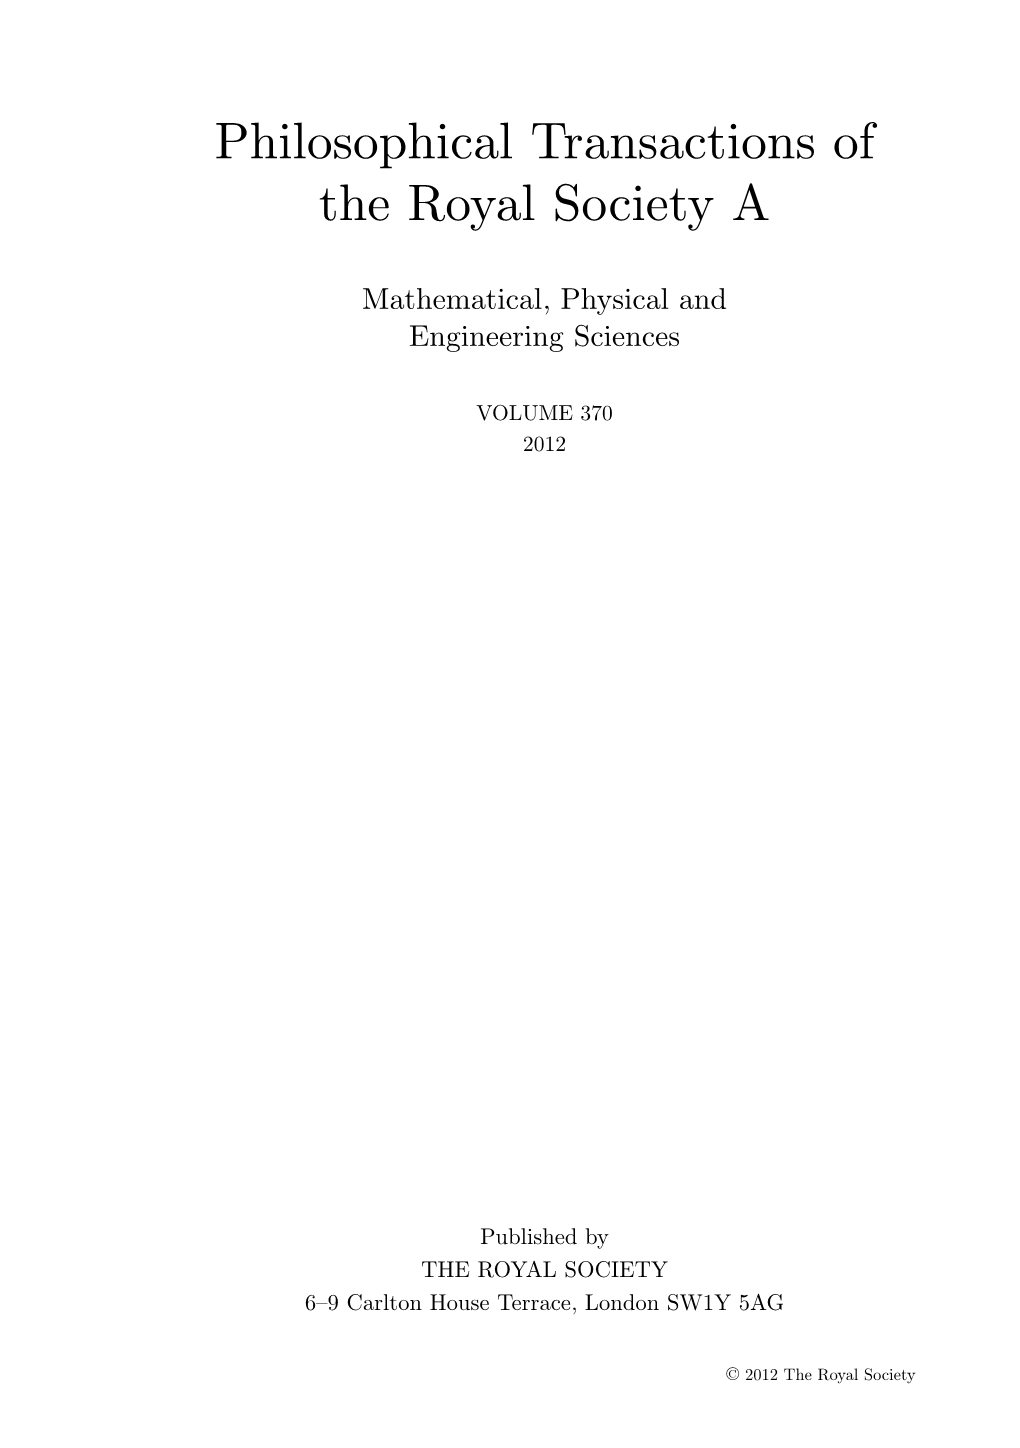 Philosophical Transactions of the Royal Society A